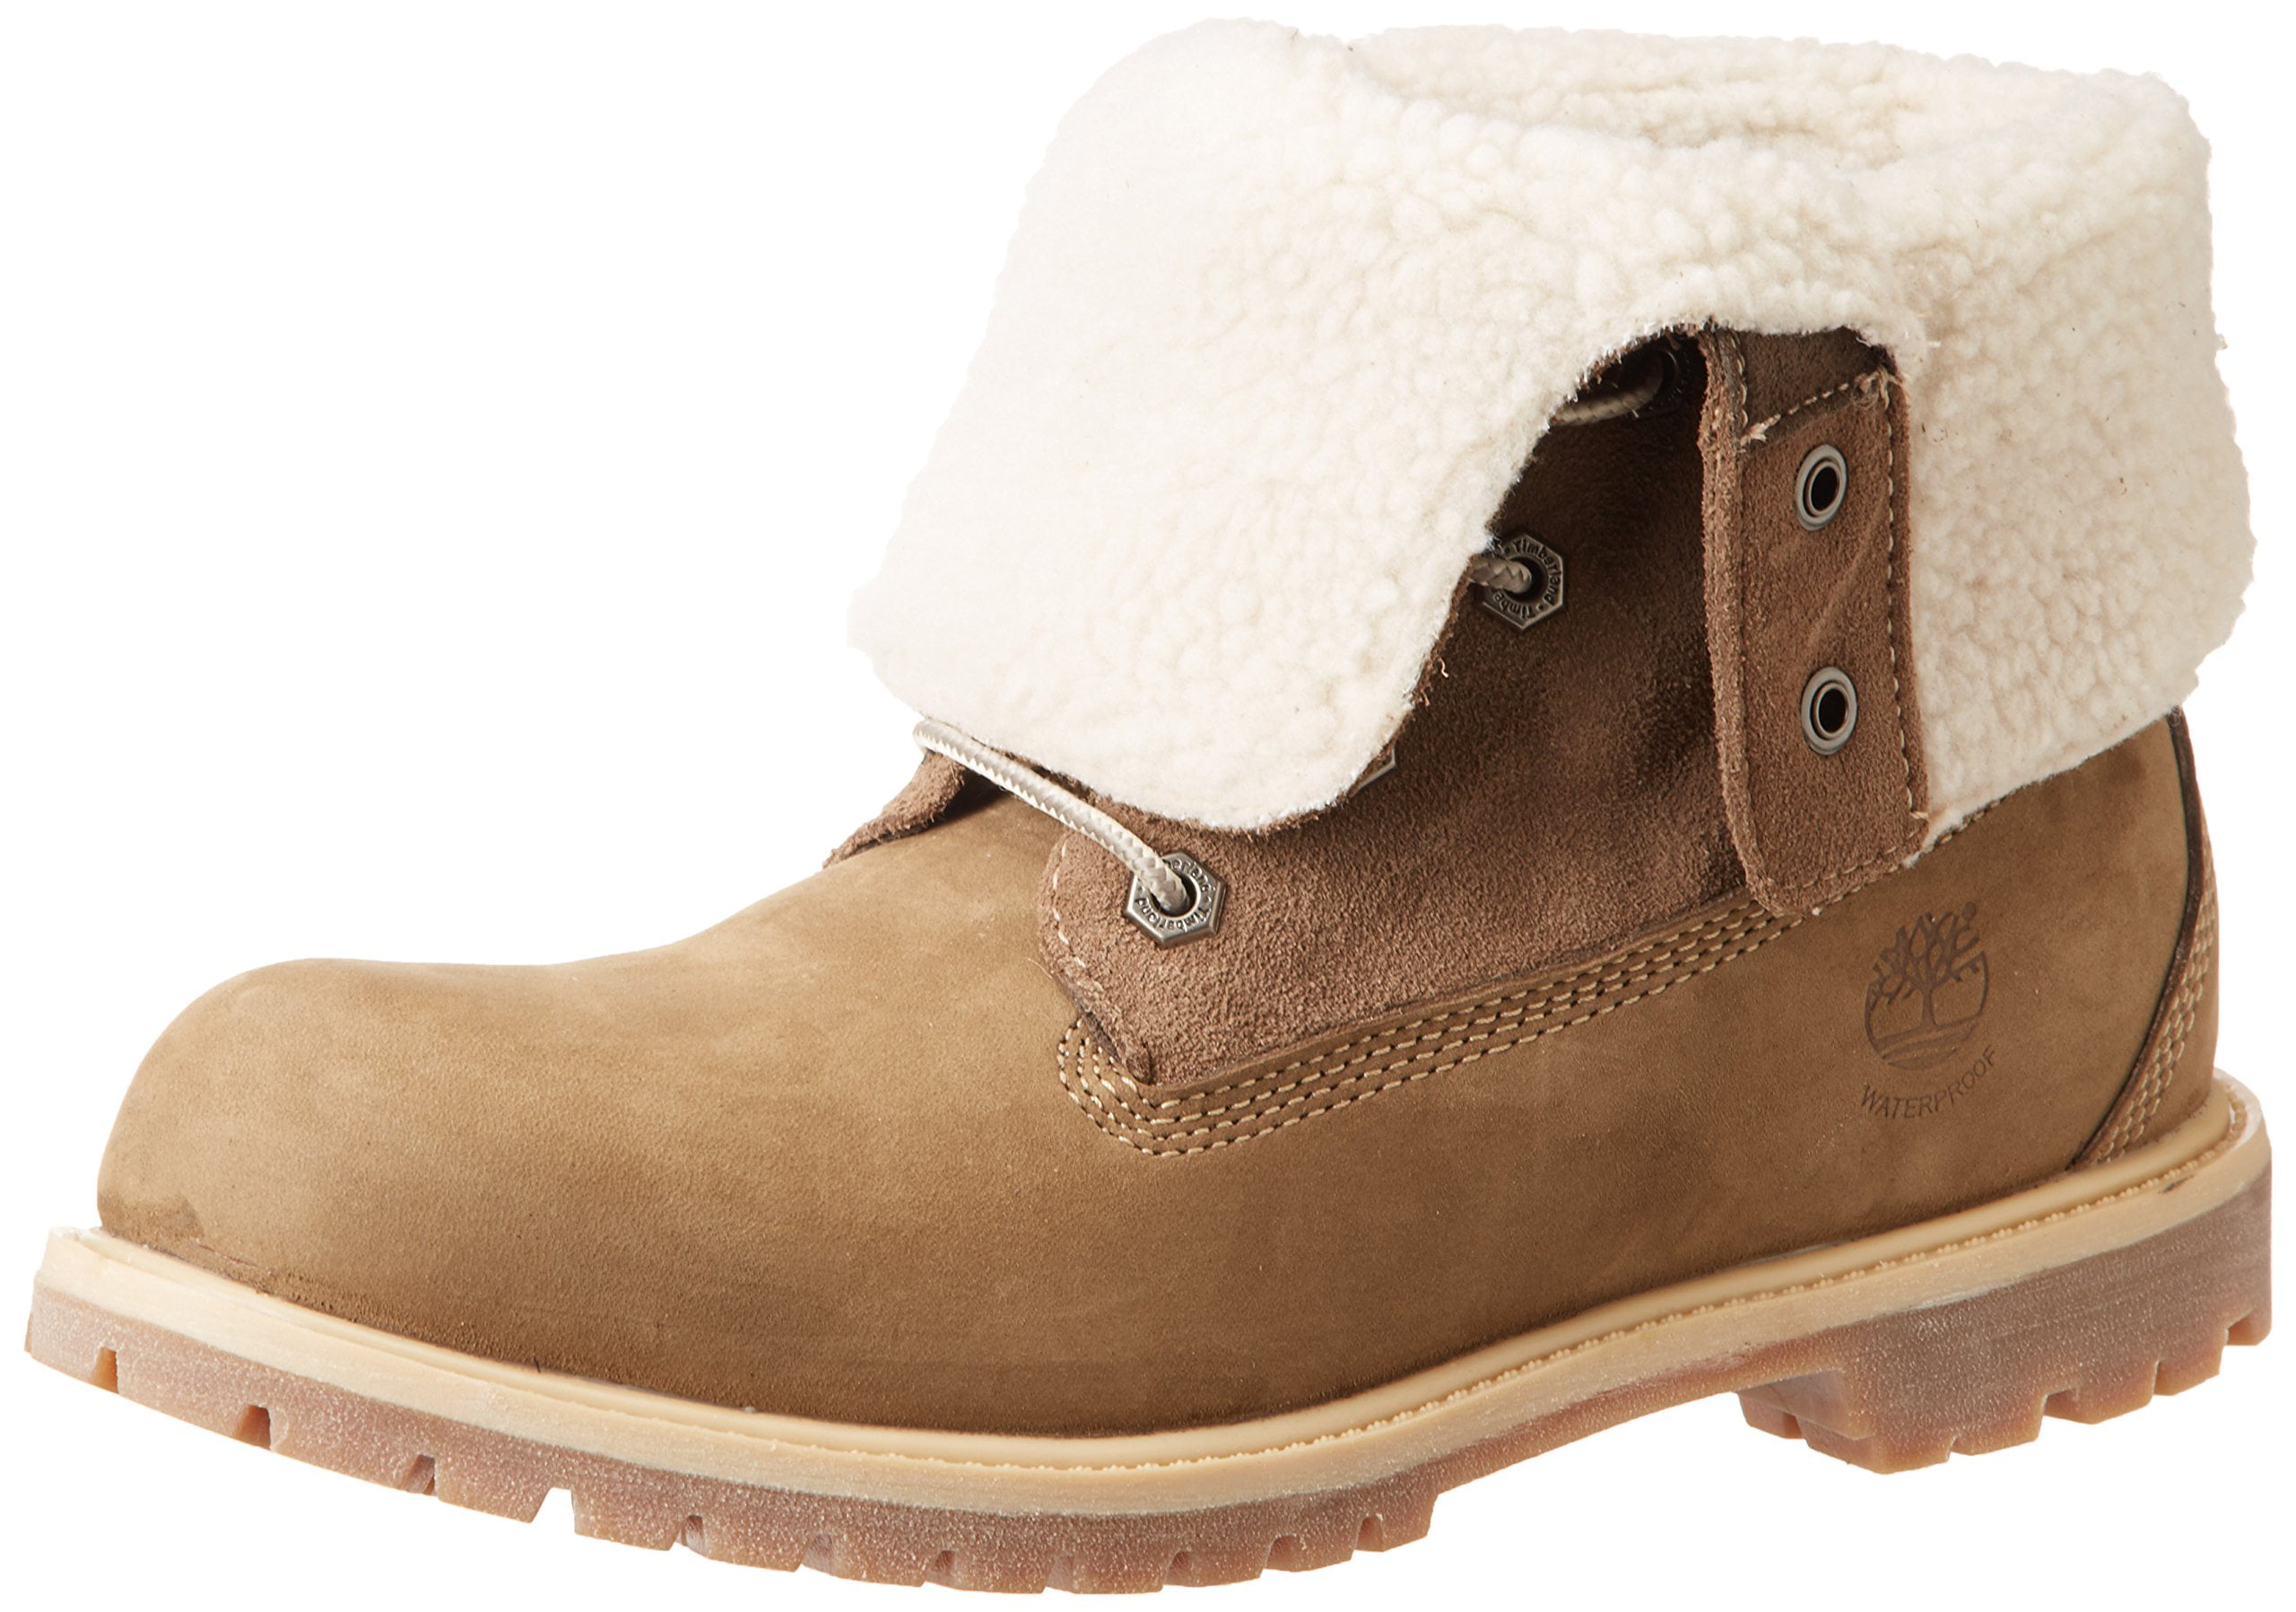 inch St Cokes Timberland Authentics Teddy Fleece Fold Down Wp Boots Taupe - Walmart.com